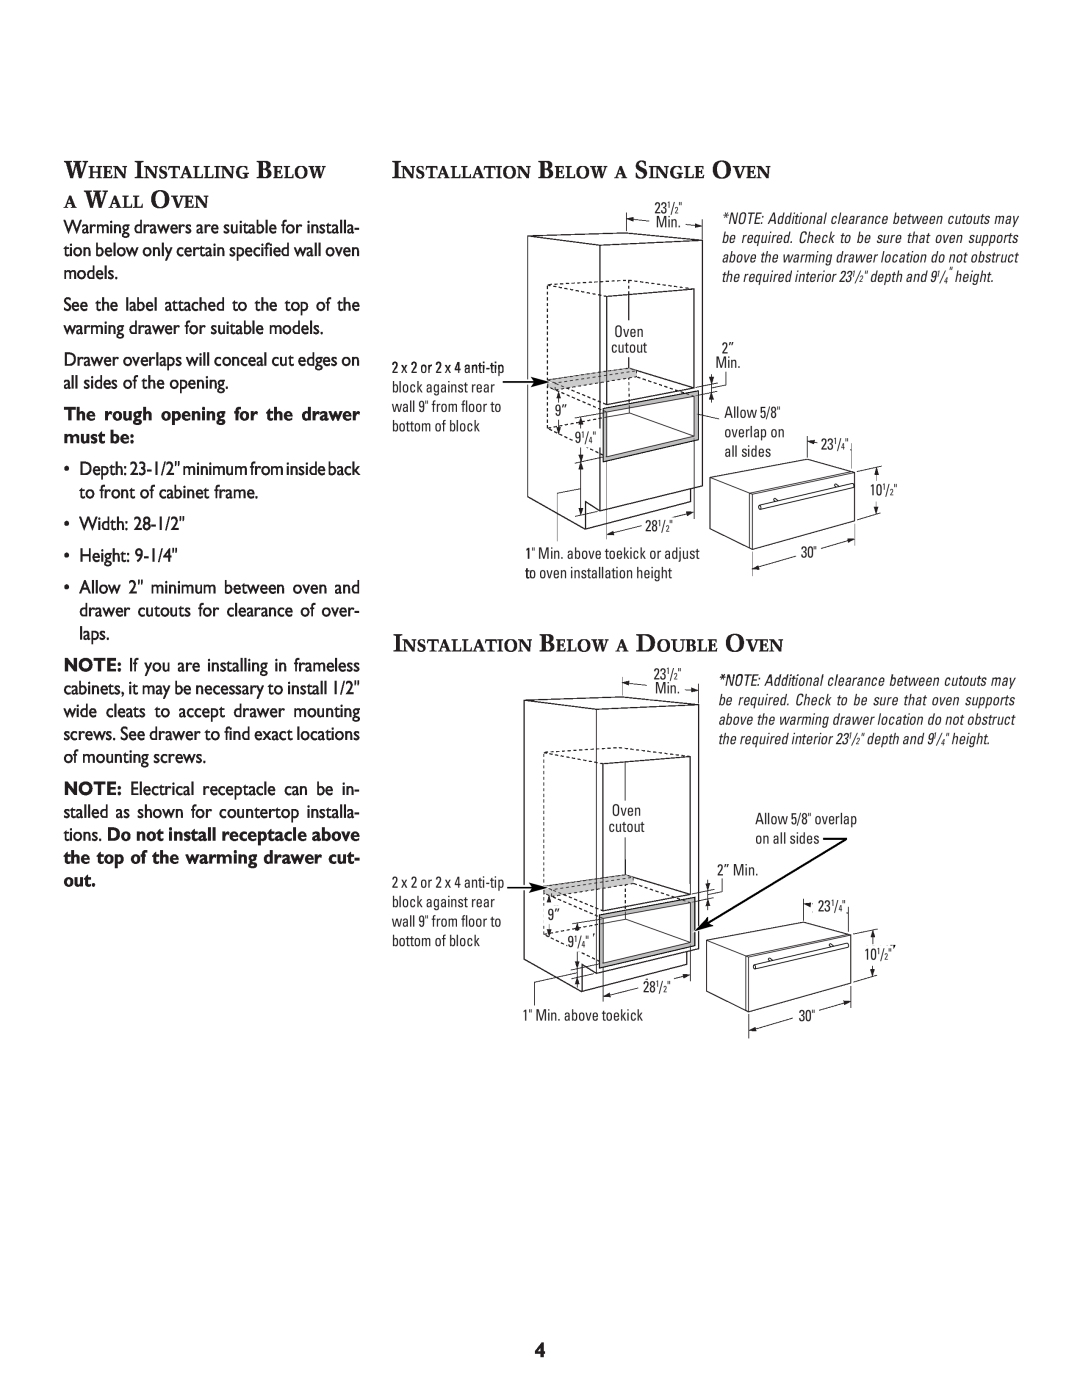 Jenn-Air 8101P549-60 specifications the top of the warming drawer cut- out, The rough opening for the drawer must be 